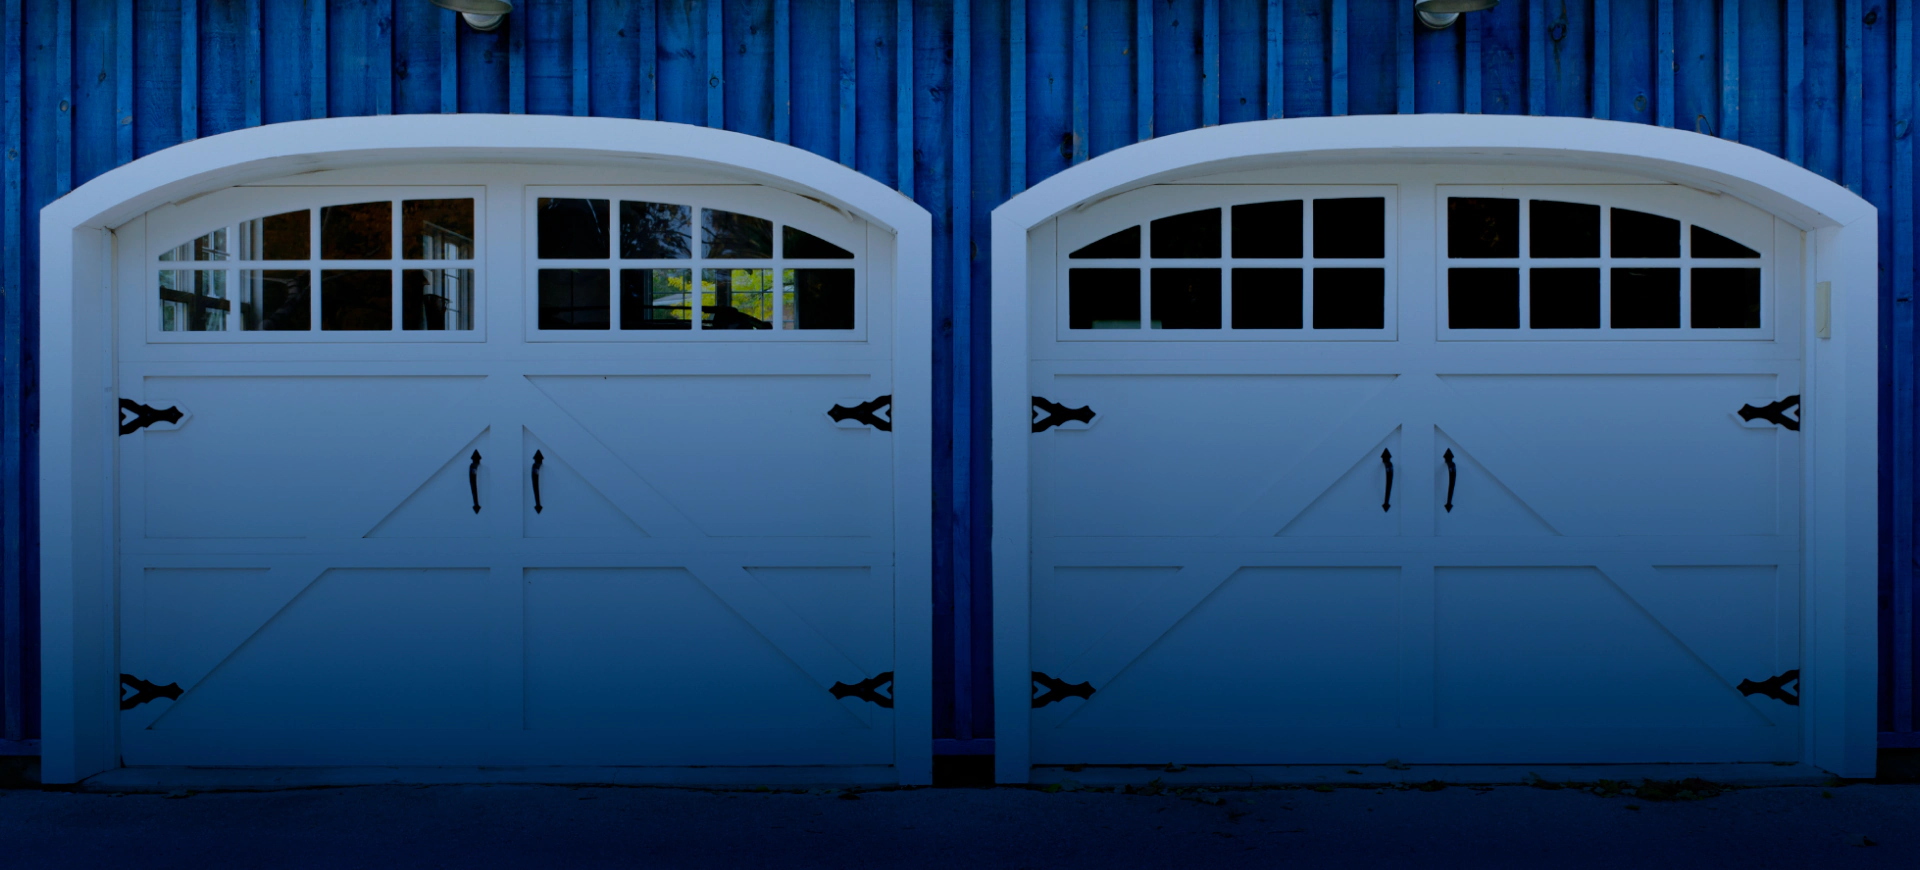 two white garage doors and blue house